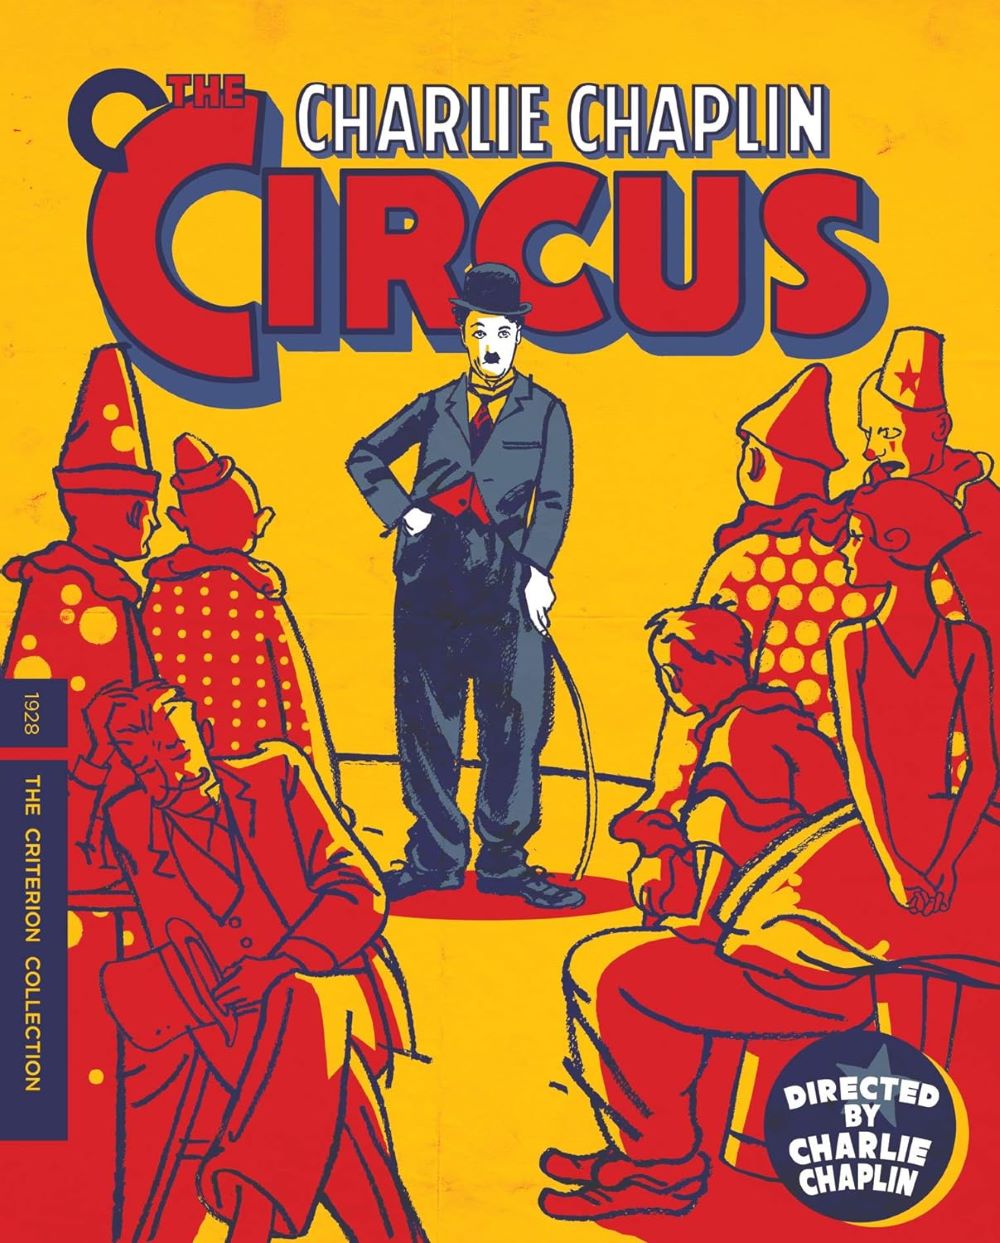 The_charlie_chaplin_circus_dvd_front_cover.